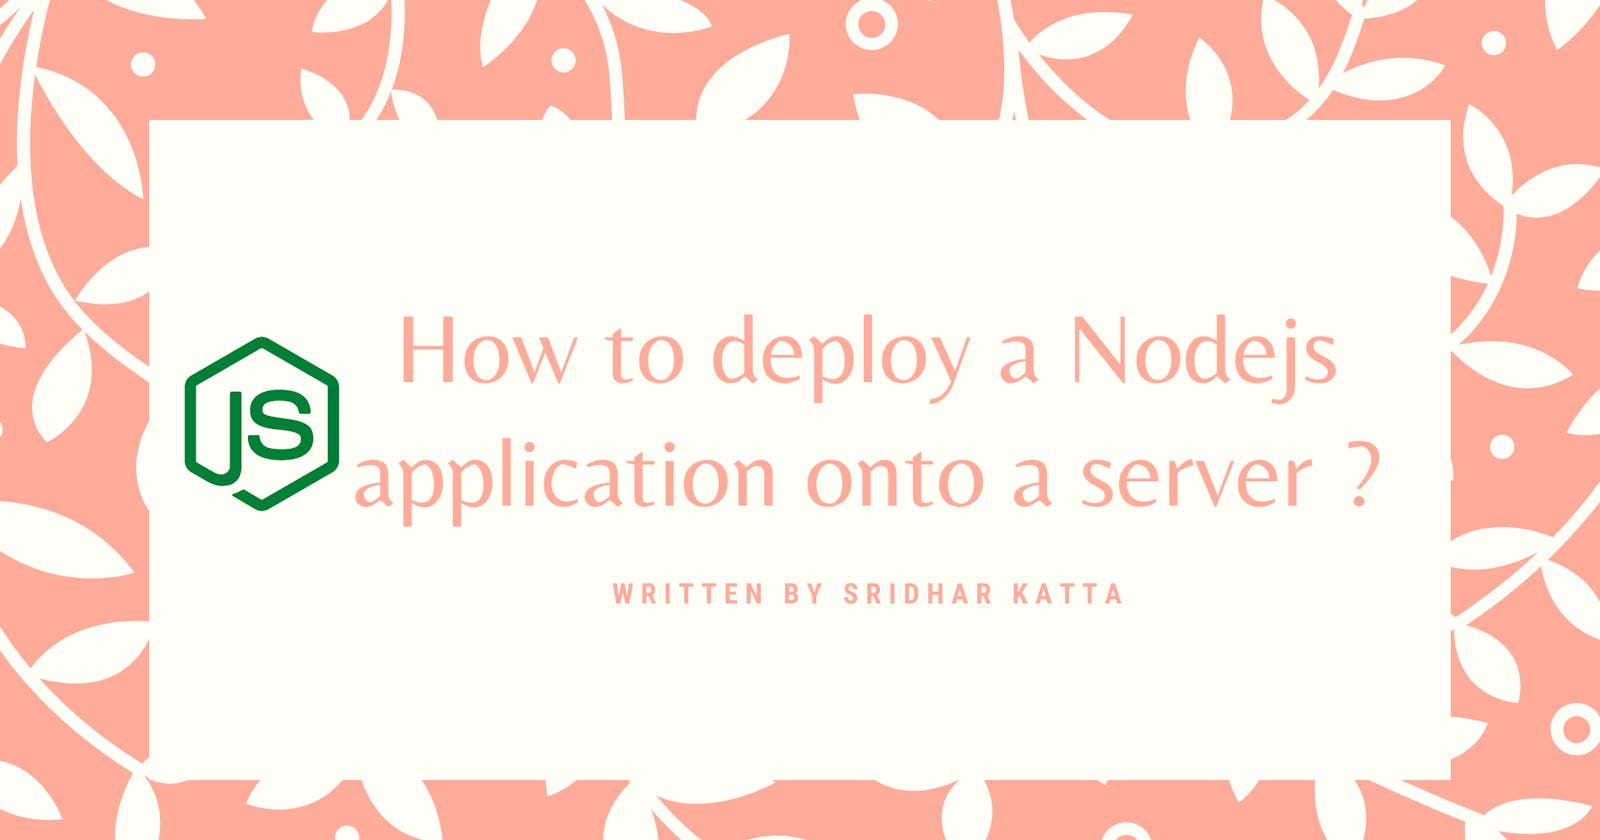 How to deploy a Nodejs application to a server from scratch with an HTTPS URL?